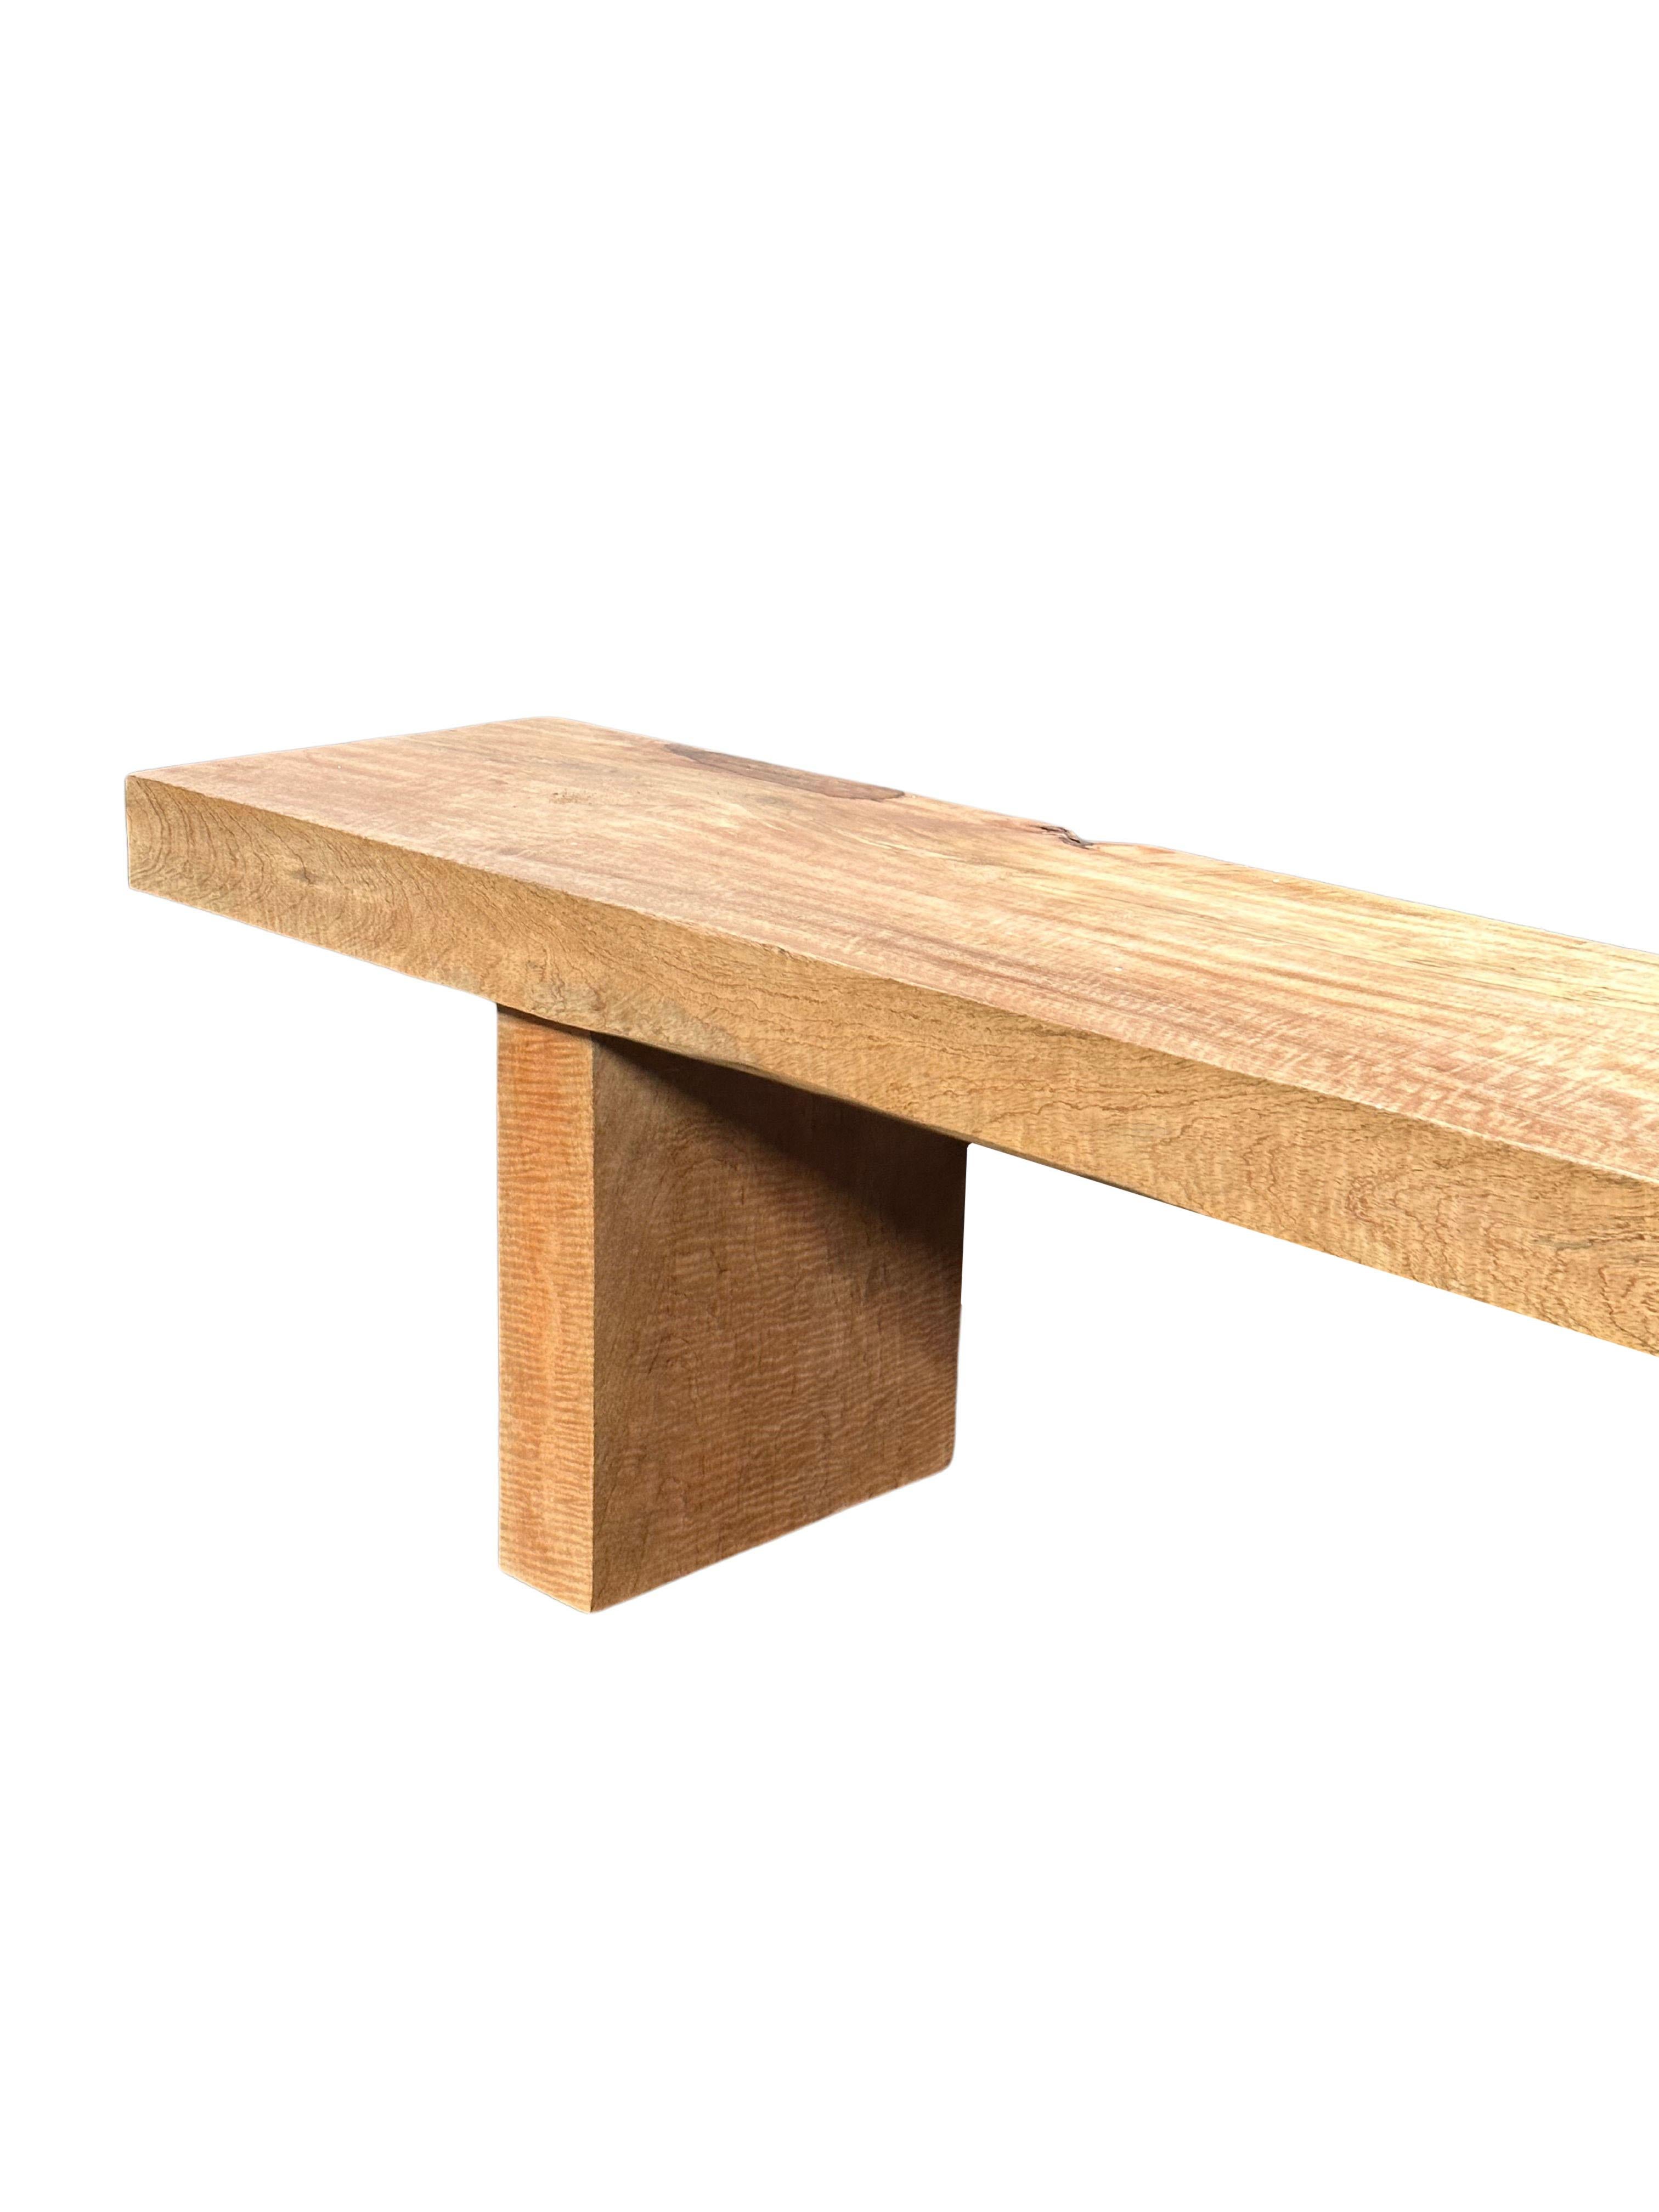 Other Sculptural Mango Wood Bench Modern Organic For Sale